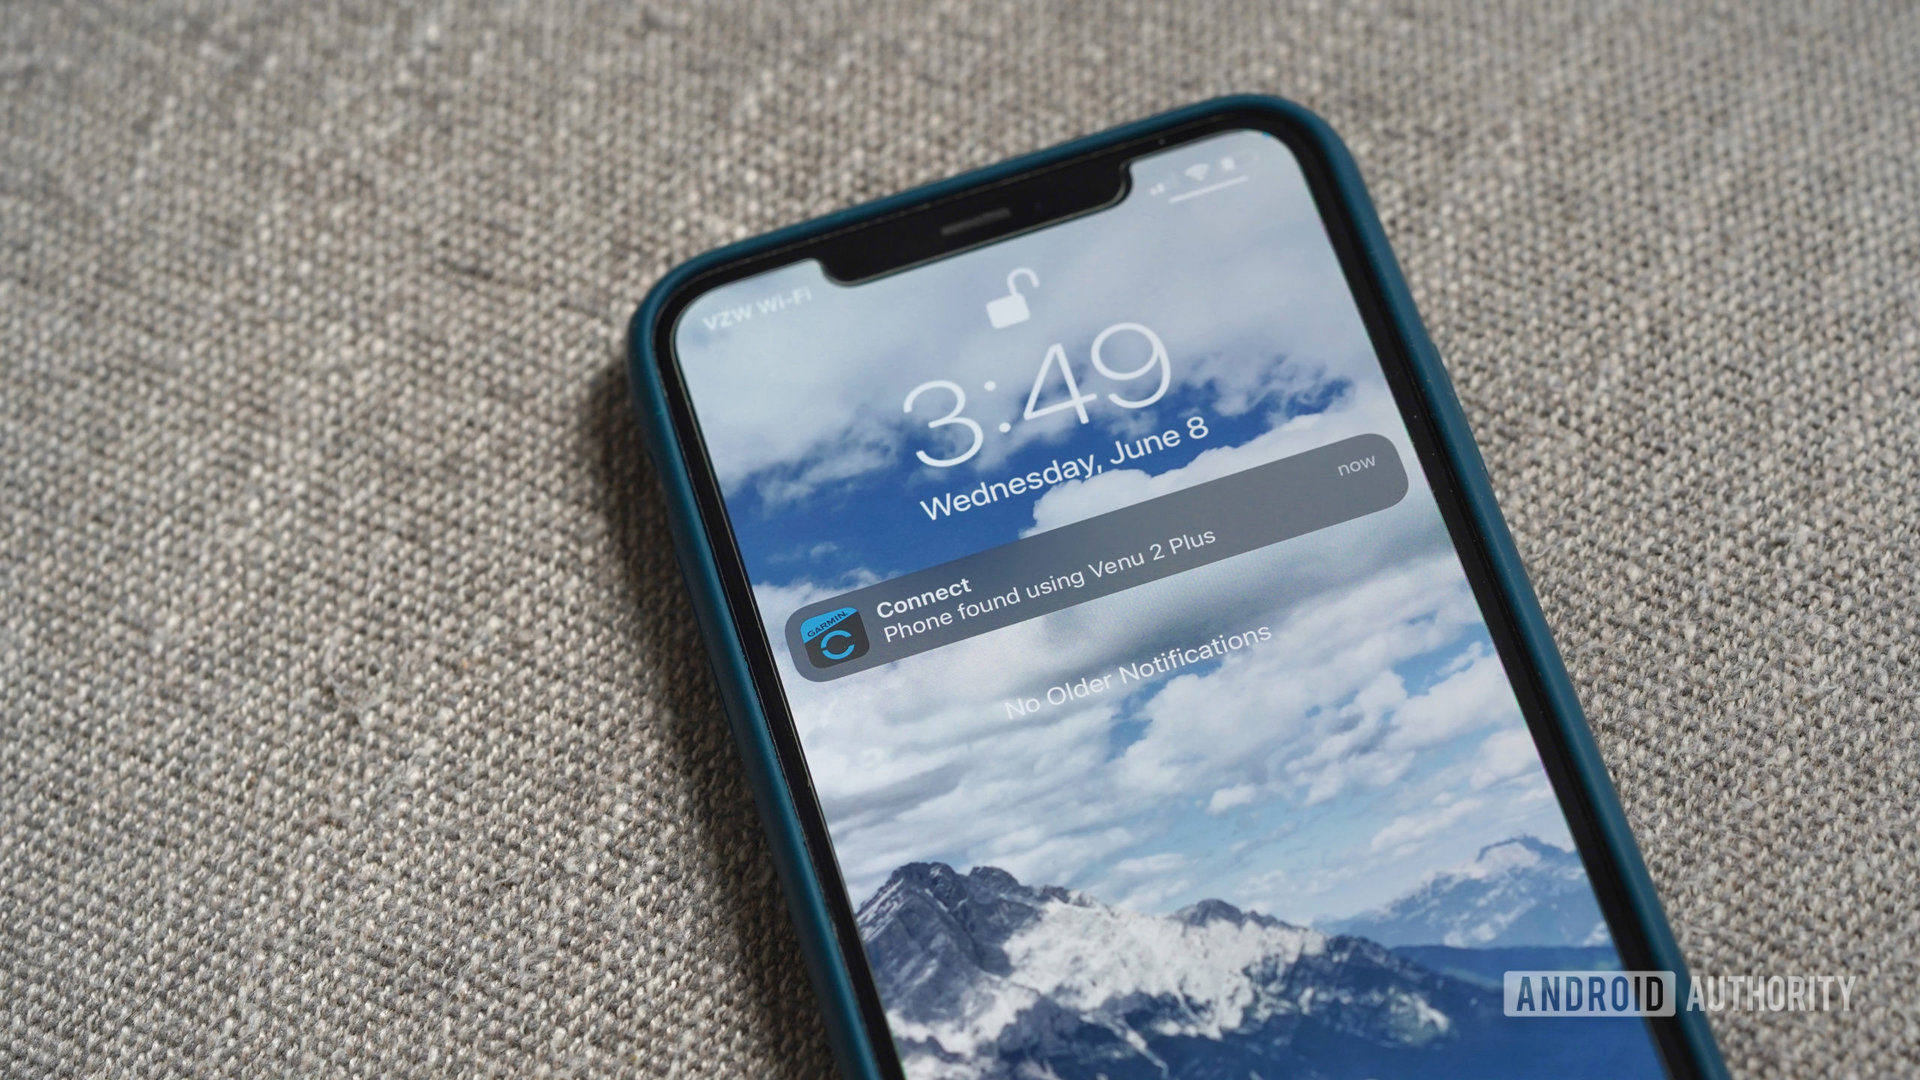 The iPhone 11 rests on a gray sofa, and displays the banner notification that it was found with a Garmin Venu 2 Plus.